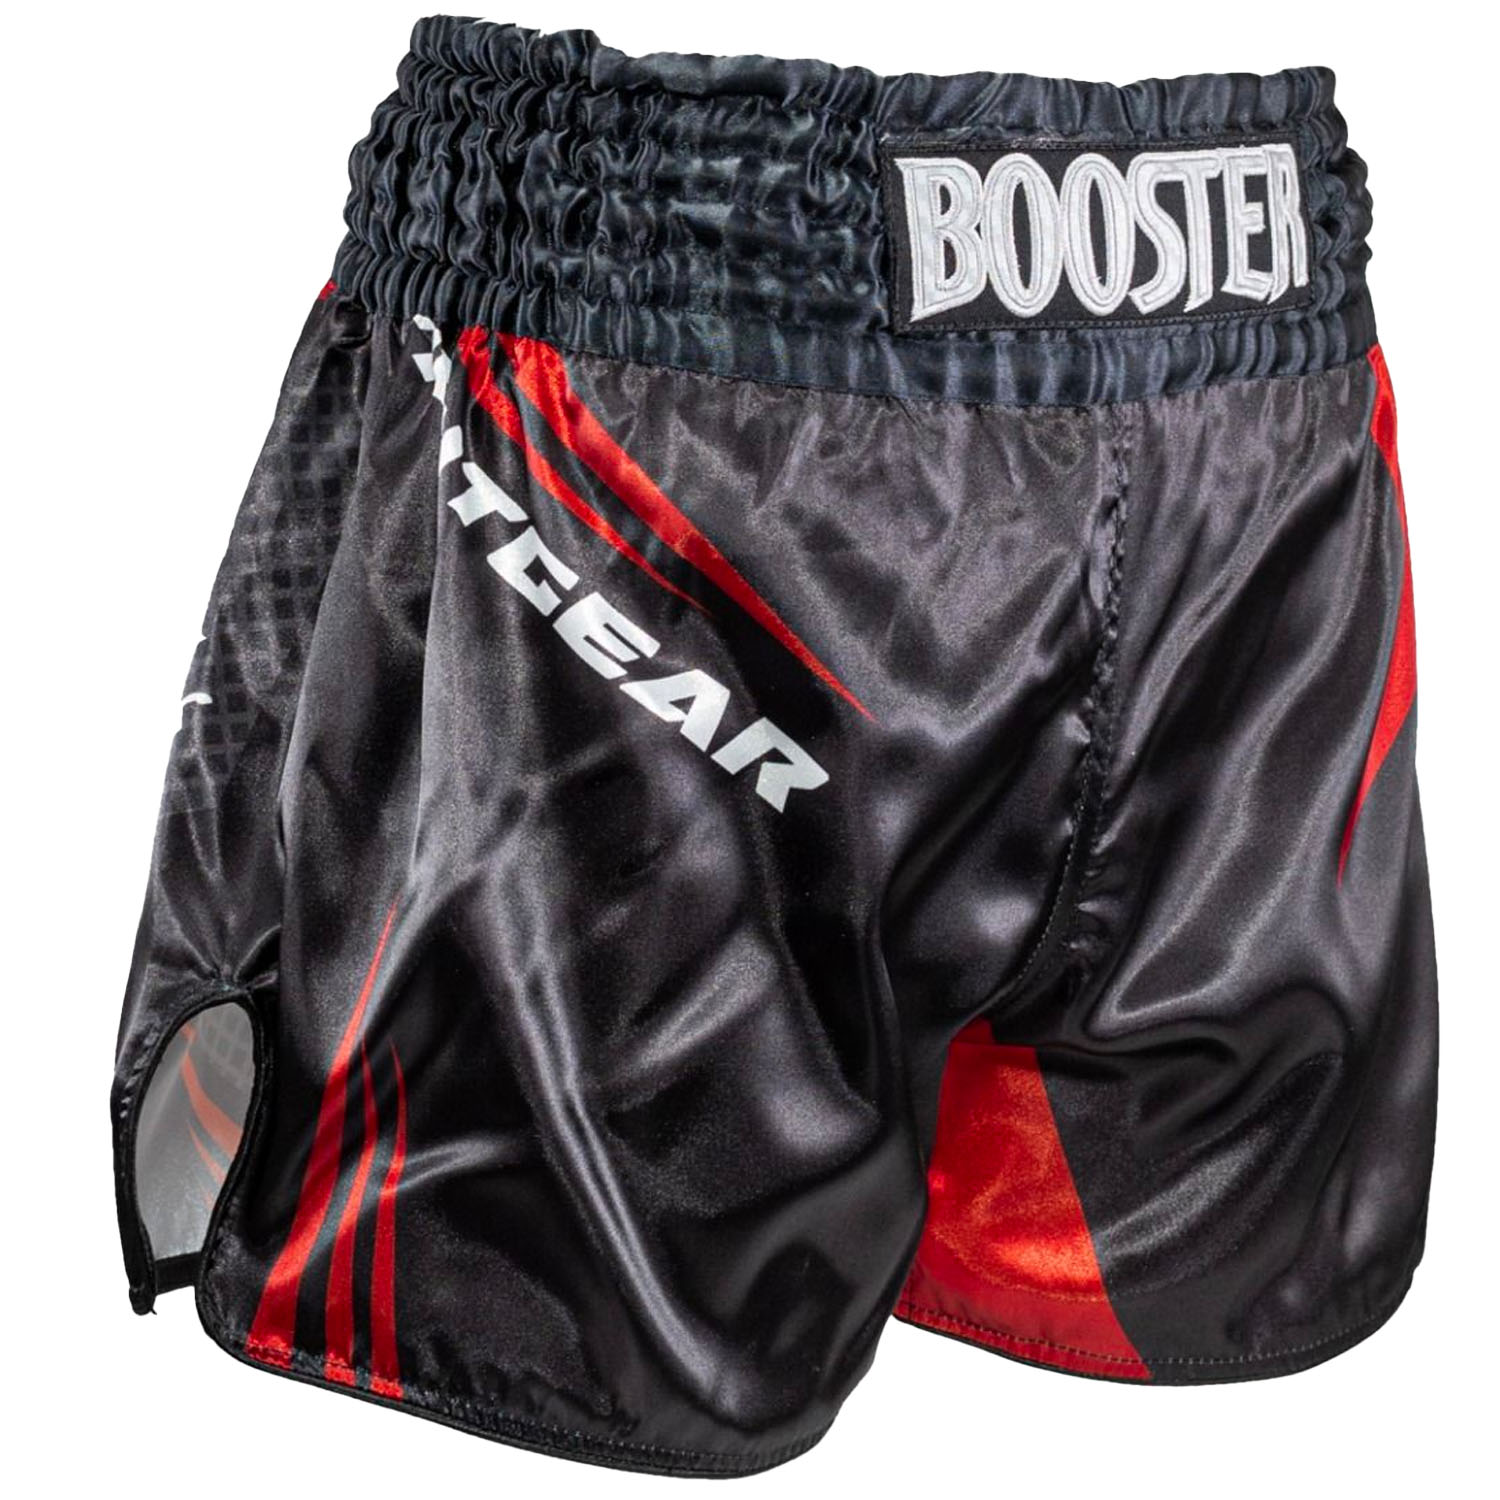 Booster Muay Thai Shorts, AD Xplosion 2, black-red, M